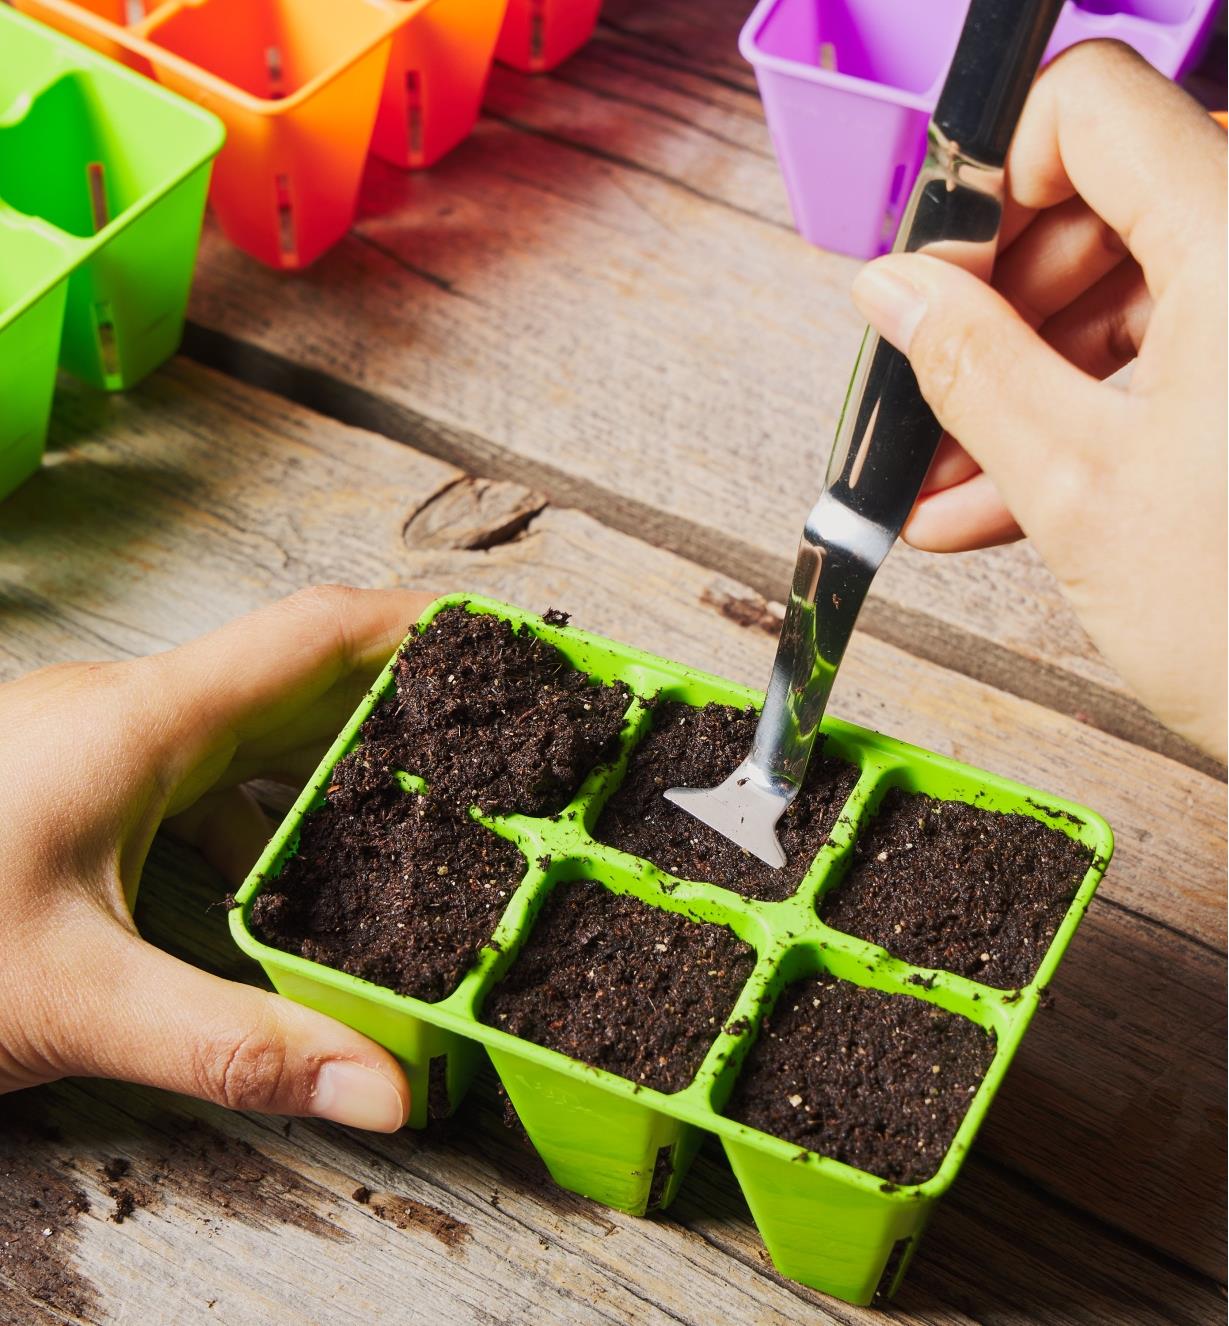 Tamping down soil in a six-cell seed starter